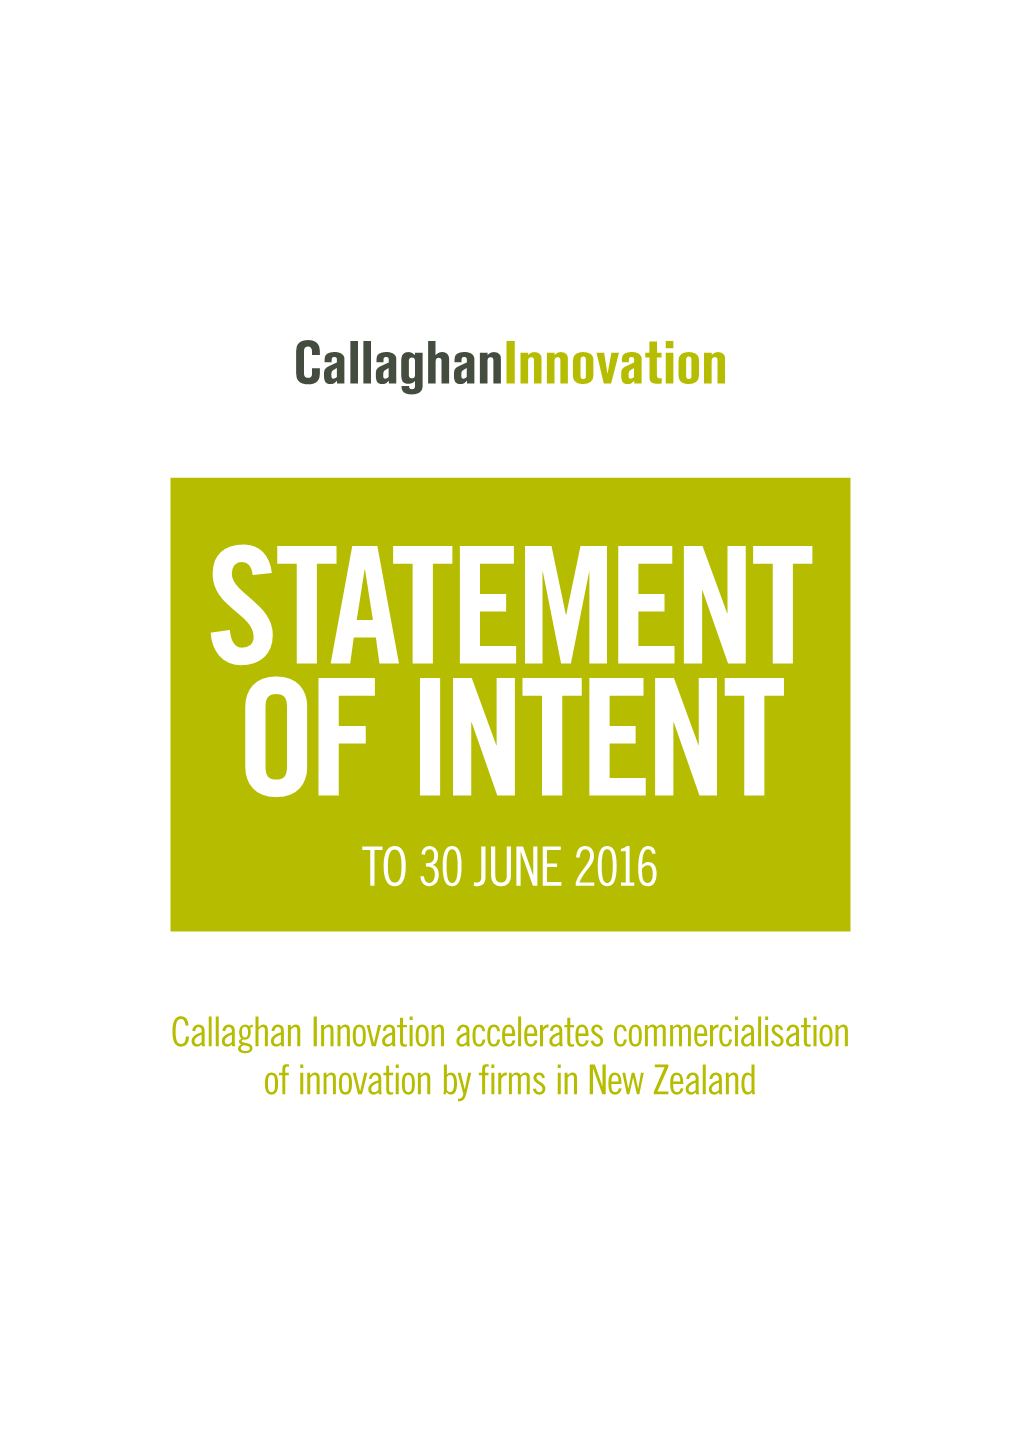 Statement of Intent to 30 June 2016